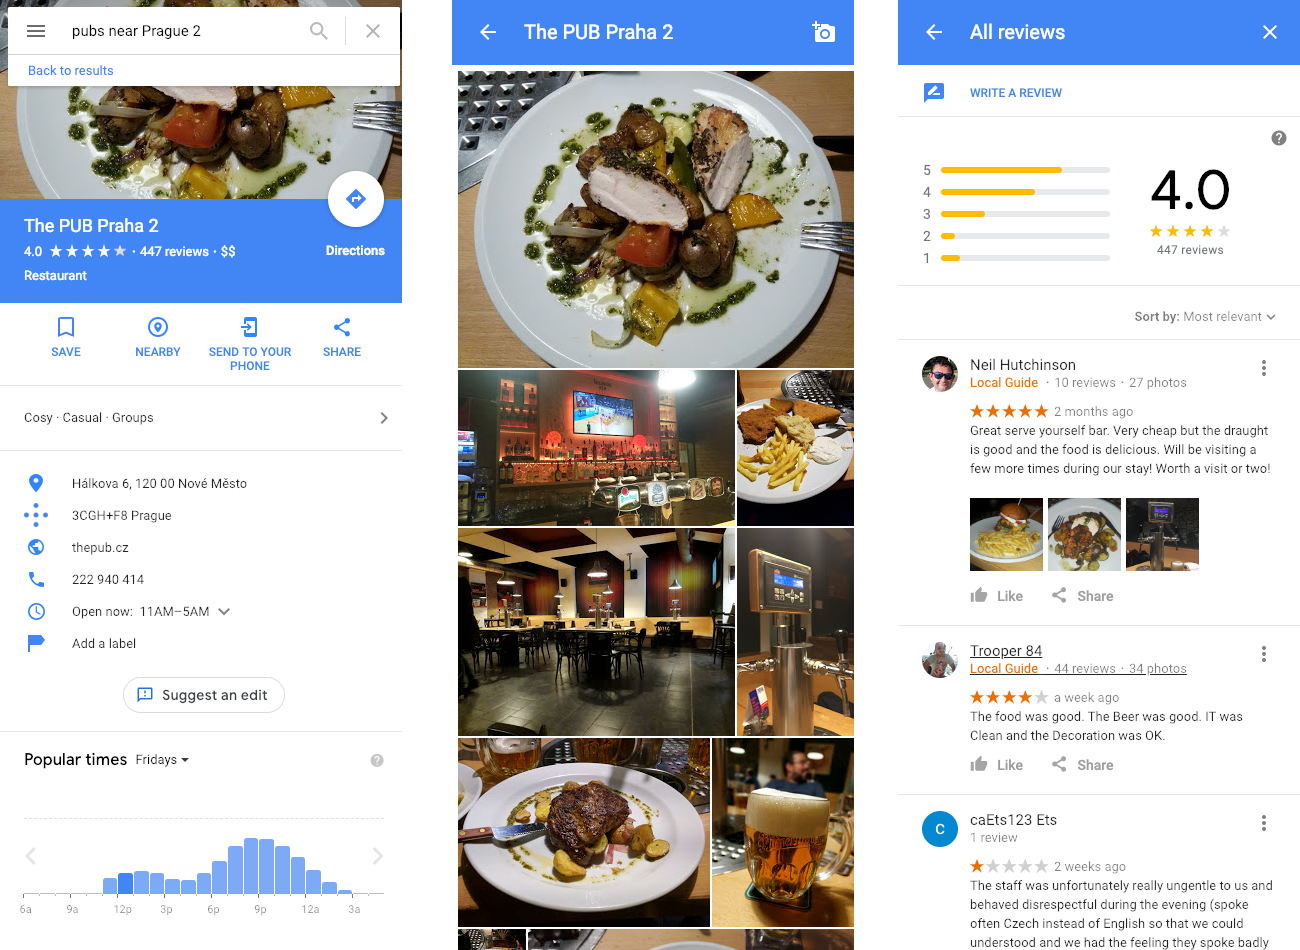 3 screenshots of a "pubs near Prague 2" search result on Google Maps with photos and reviews of the restaurant